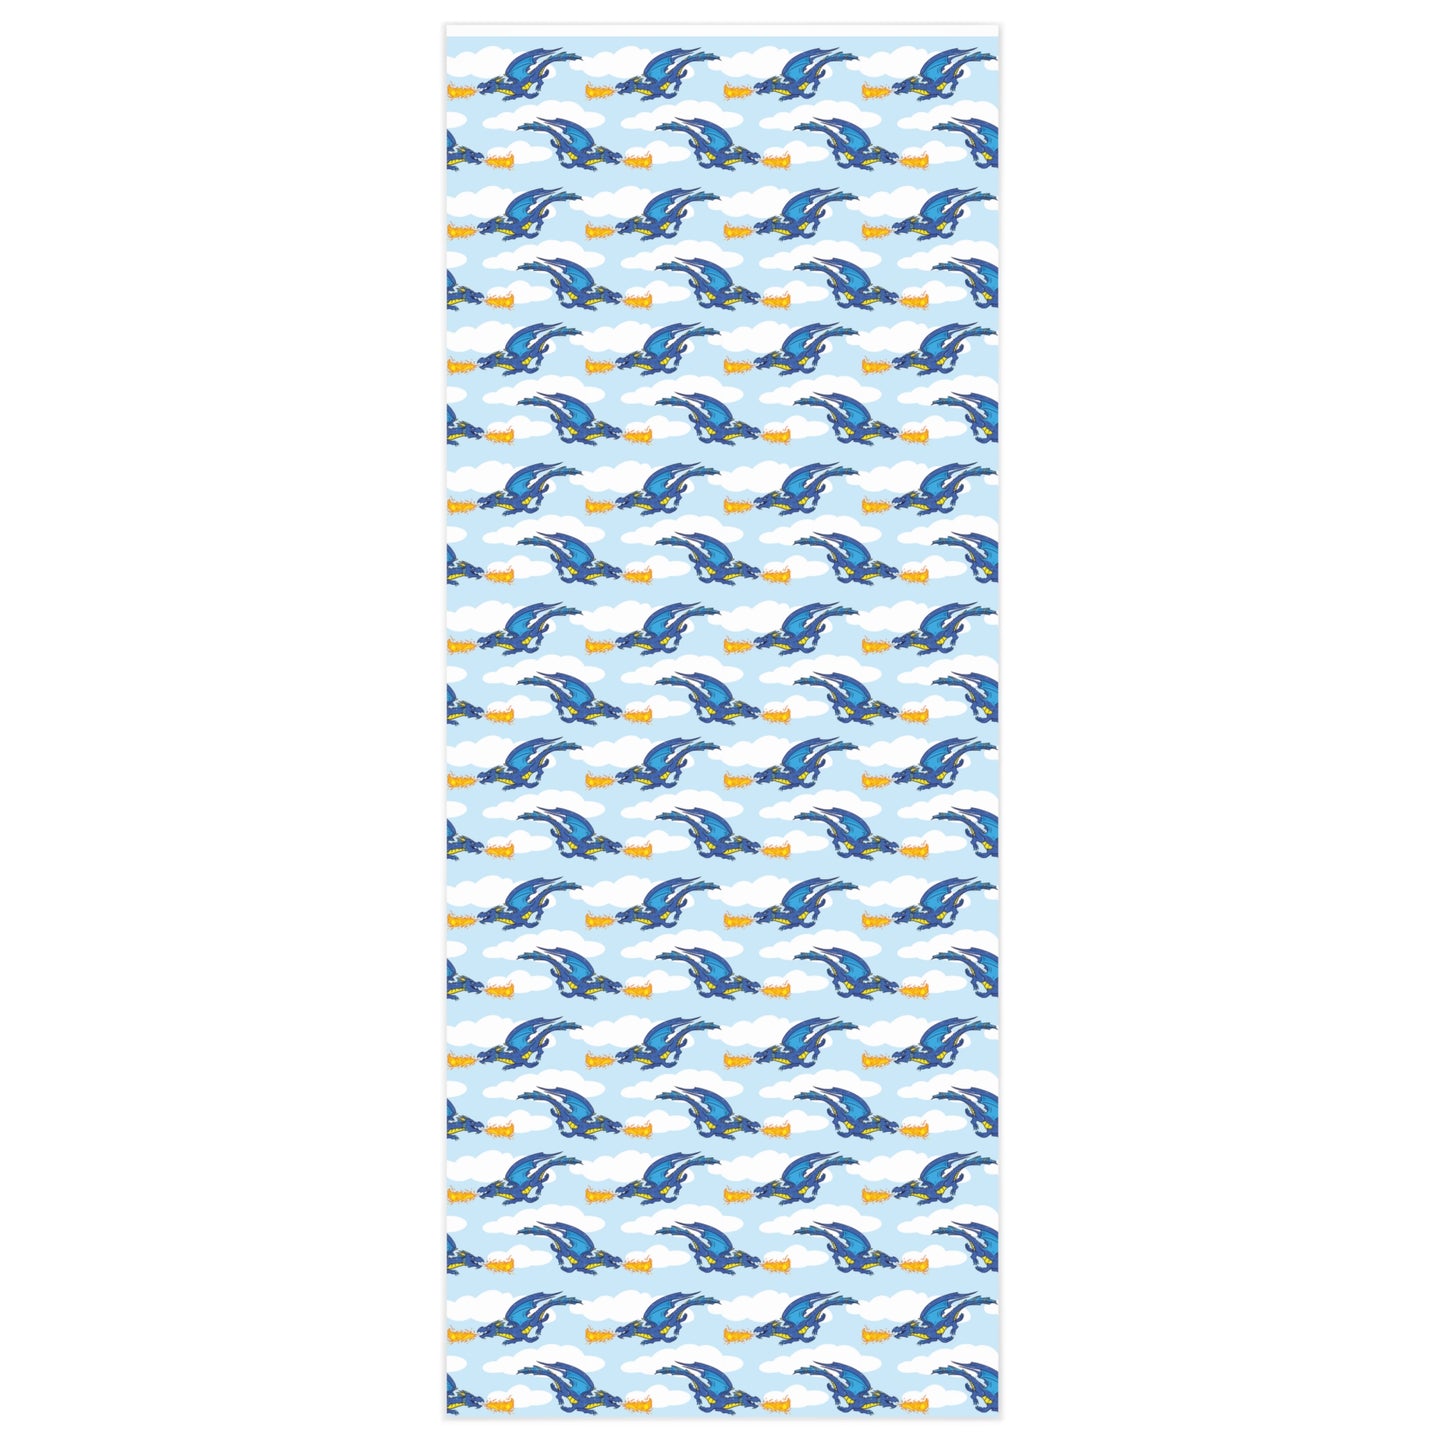 "Fire Dragon in the Clouds" - Wrapping Paper (2 sizes)